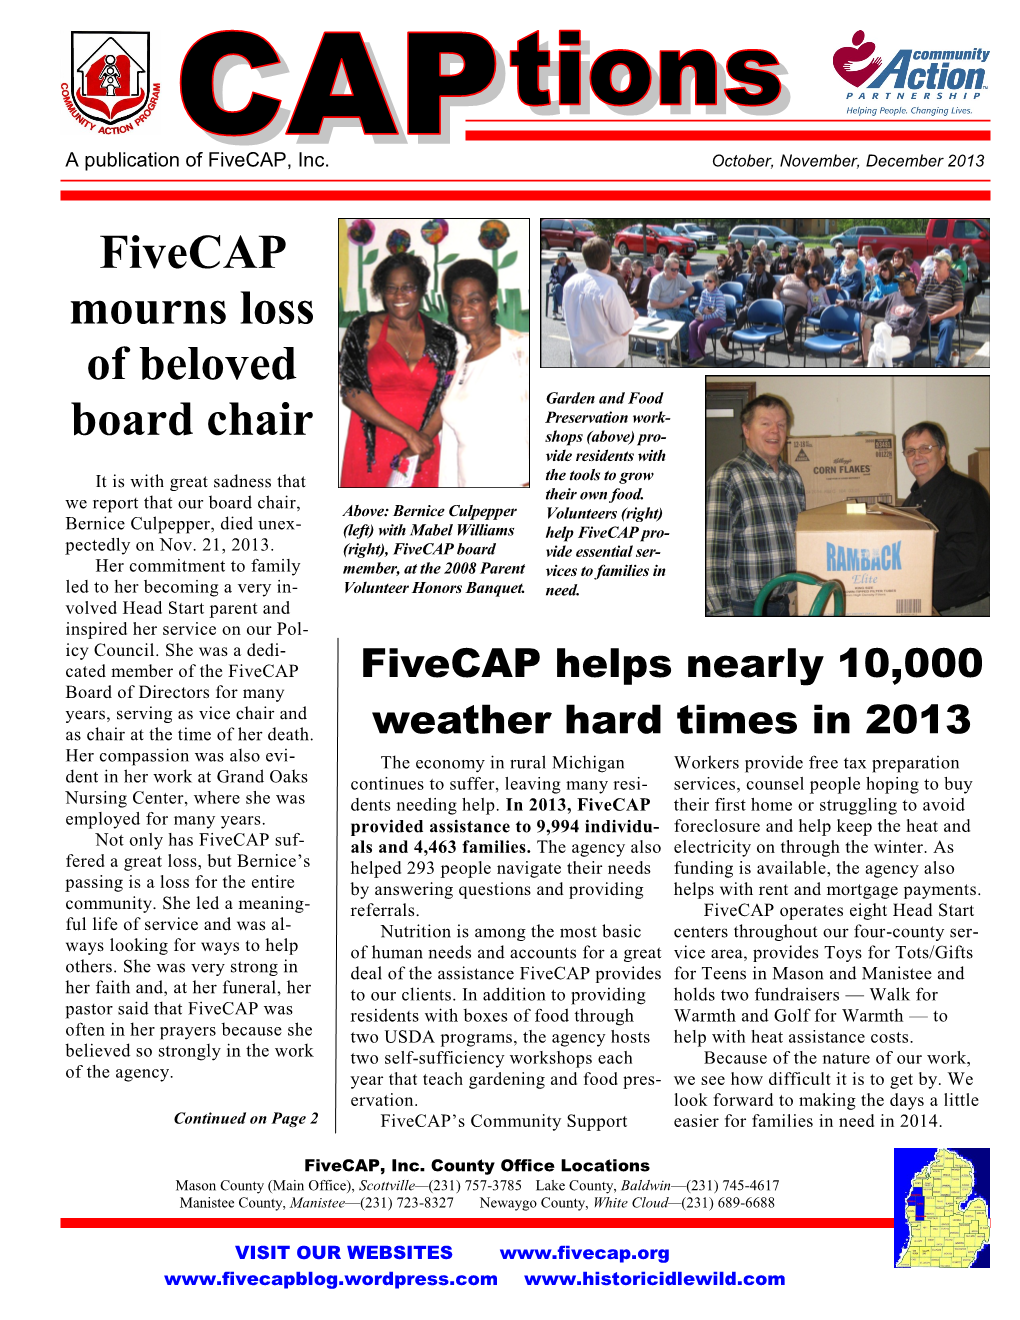 Fivecap Mourns Loss of Beloved Board Chair